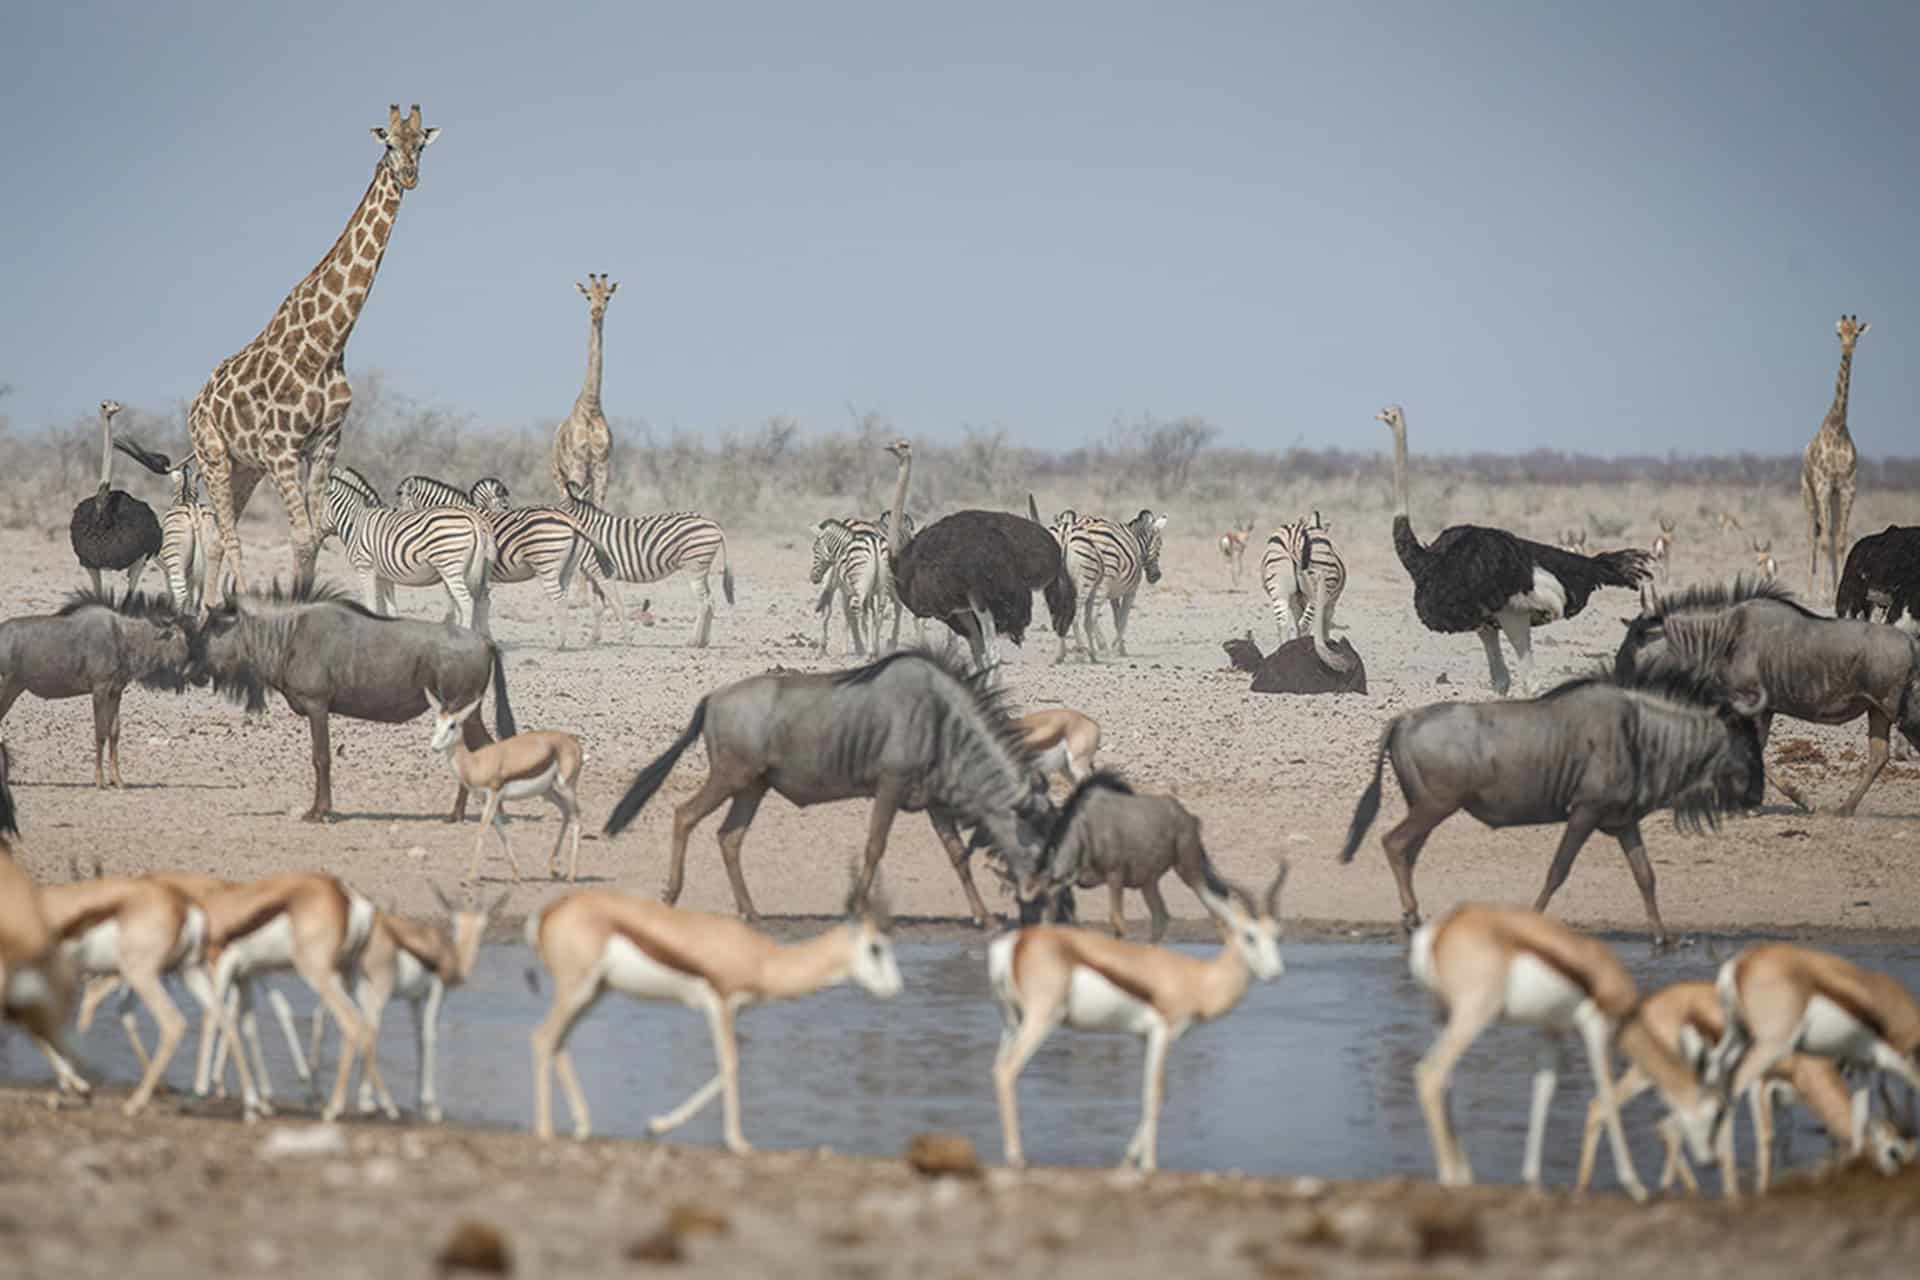 Animals drinking at water hole in Namibia taken by wildlife photographer James Suter